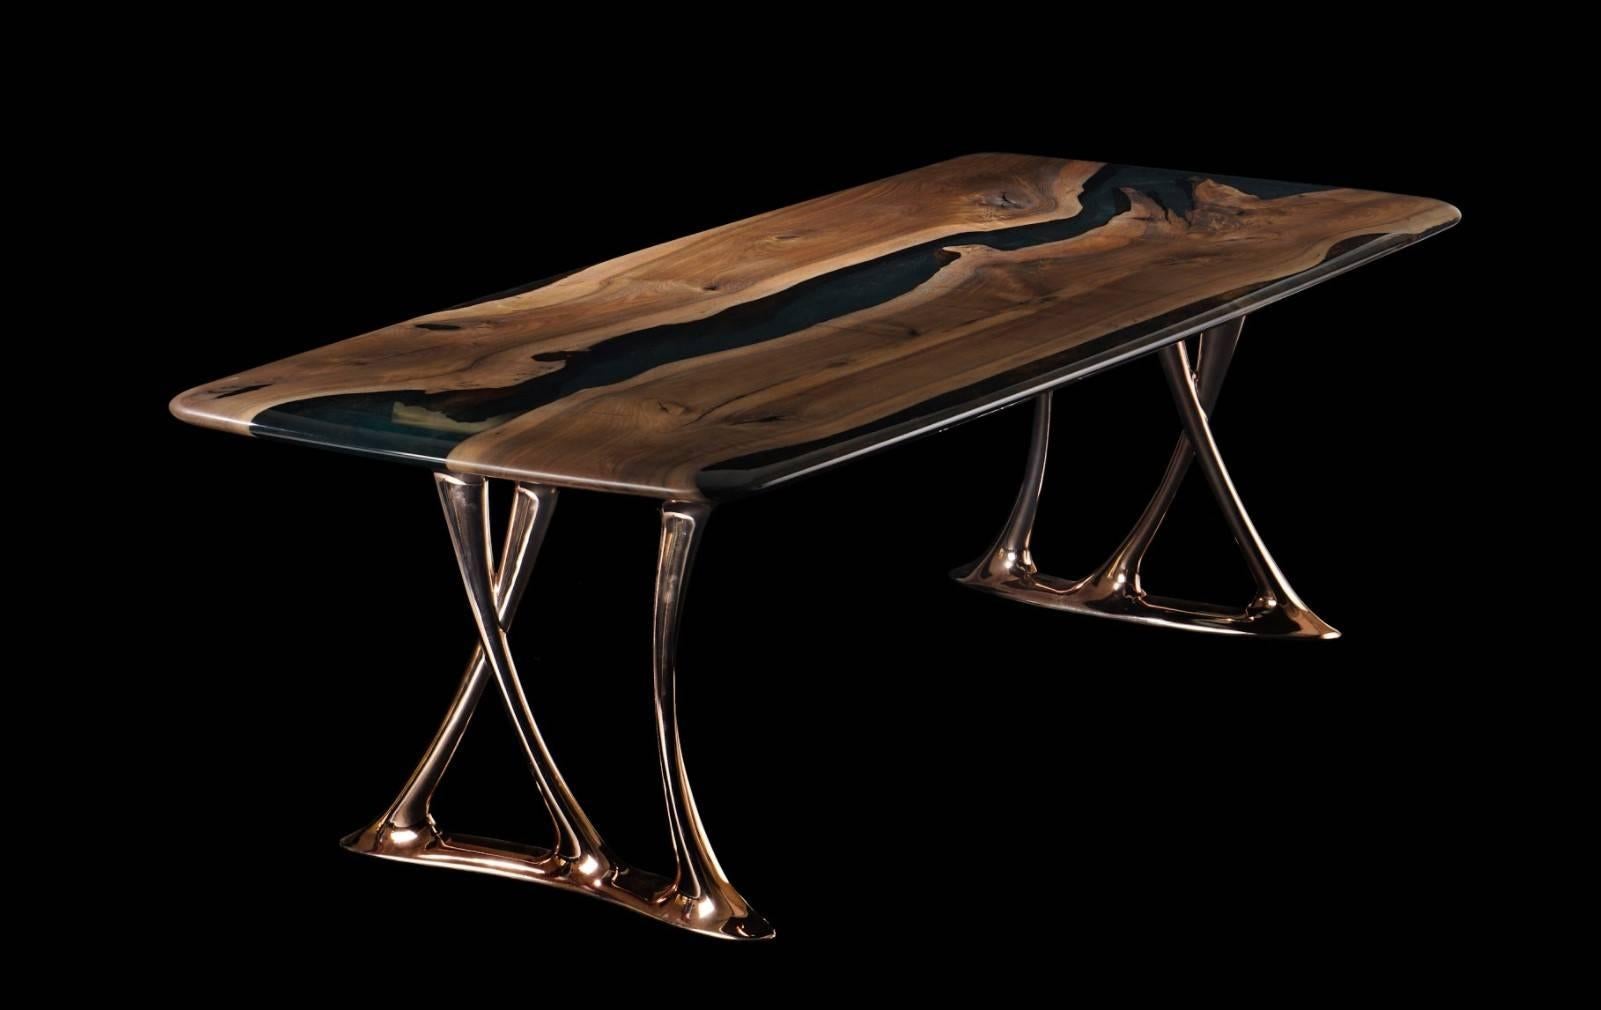 The ‘Osso 270' as made in Ankara, Turkey with walnut wood. The wood is kilned and dried prior to being filled with high quality resin. The edges are rounded to perfection and have copper colored aluminium legs. 

Measures: Length 105